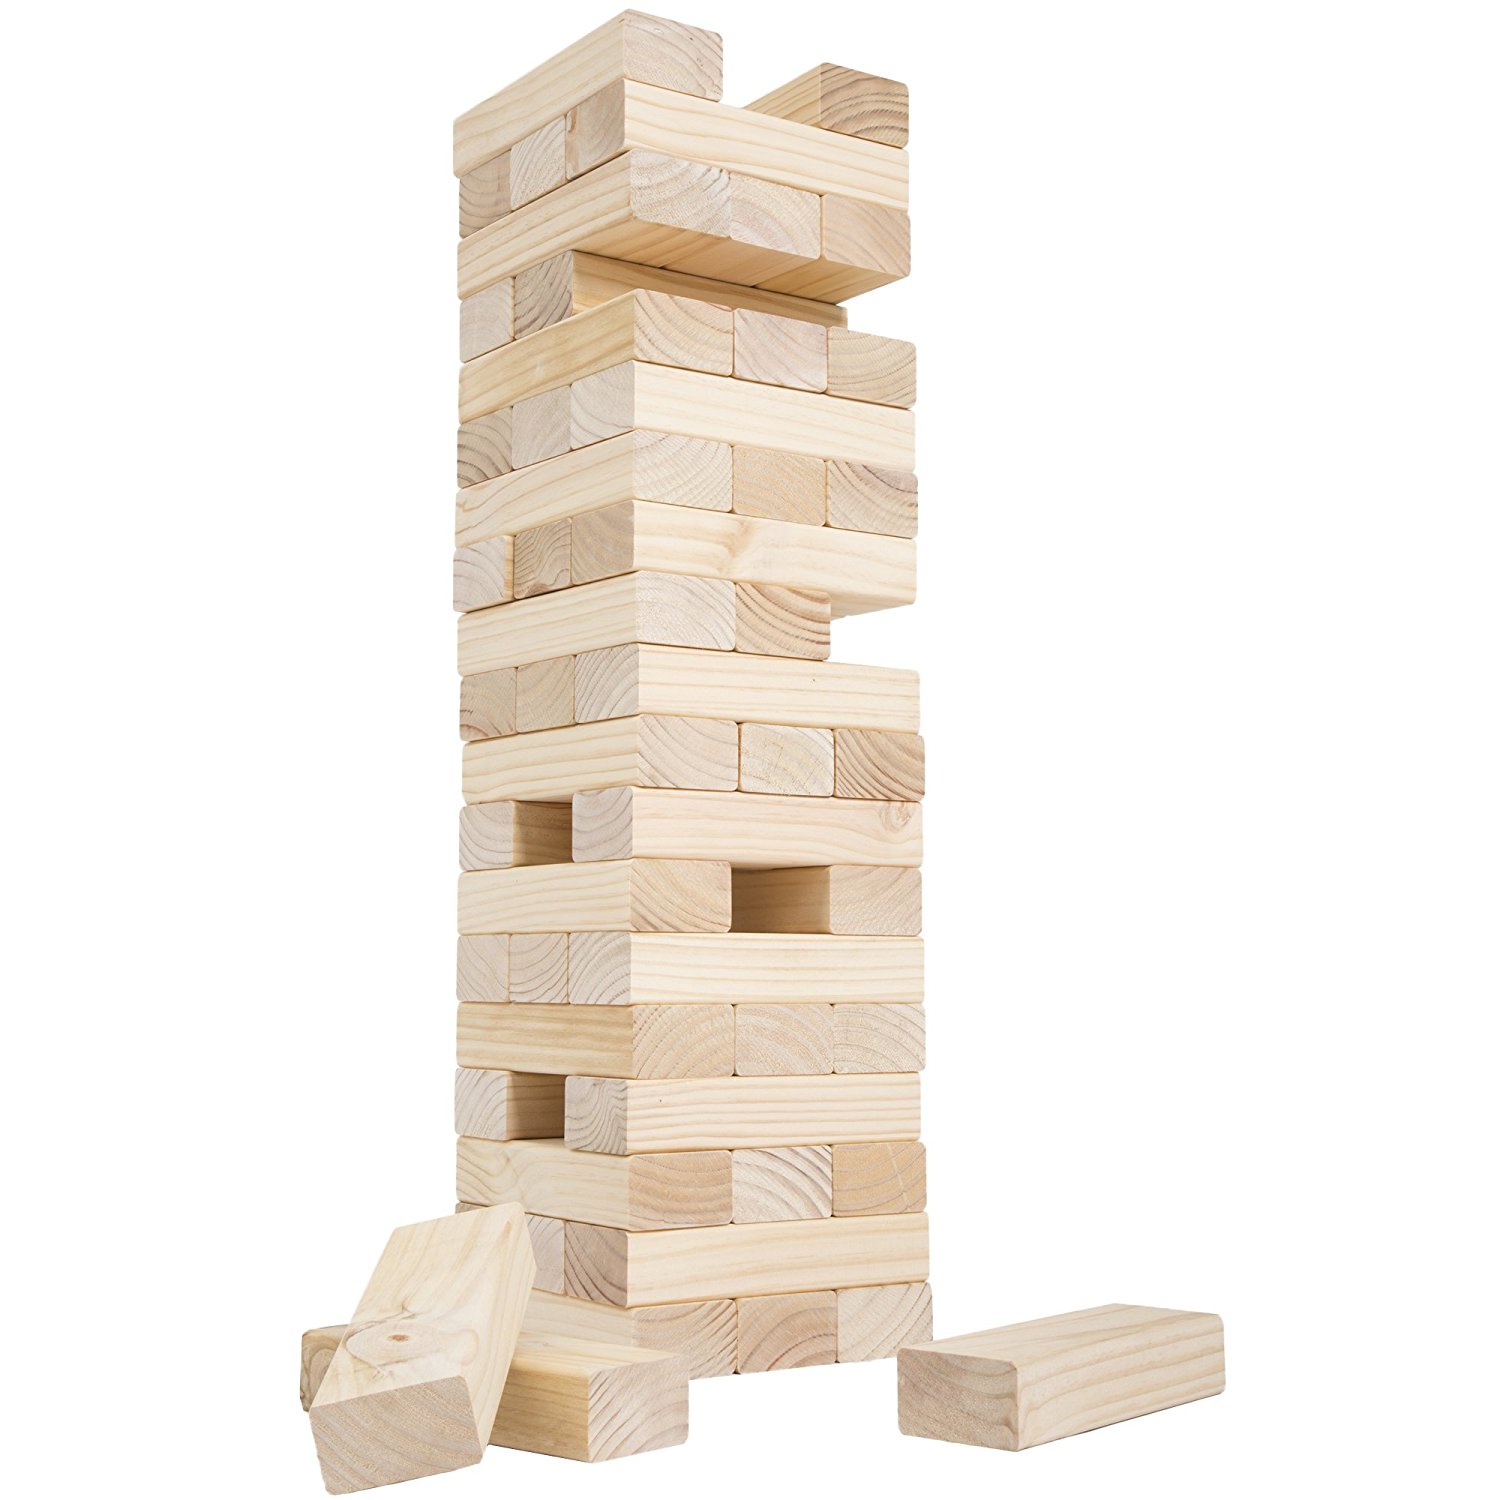 Amazon.com: Hey! Play! Classic Giant Wooden Blocks Tower Stacking ...